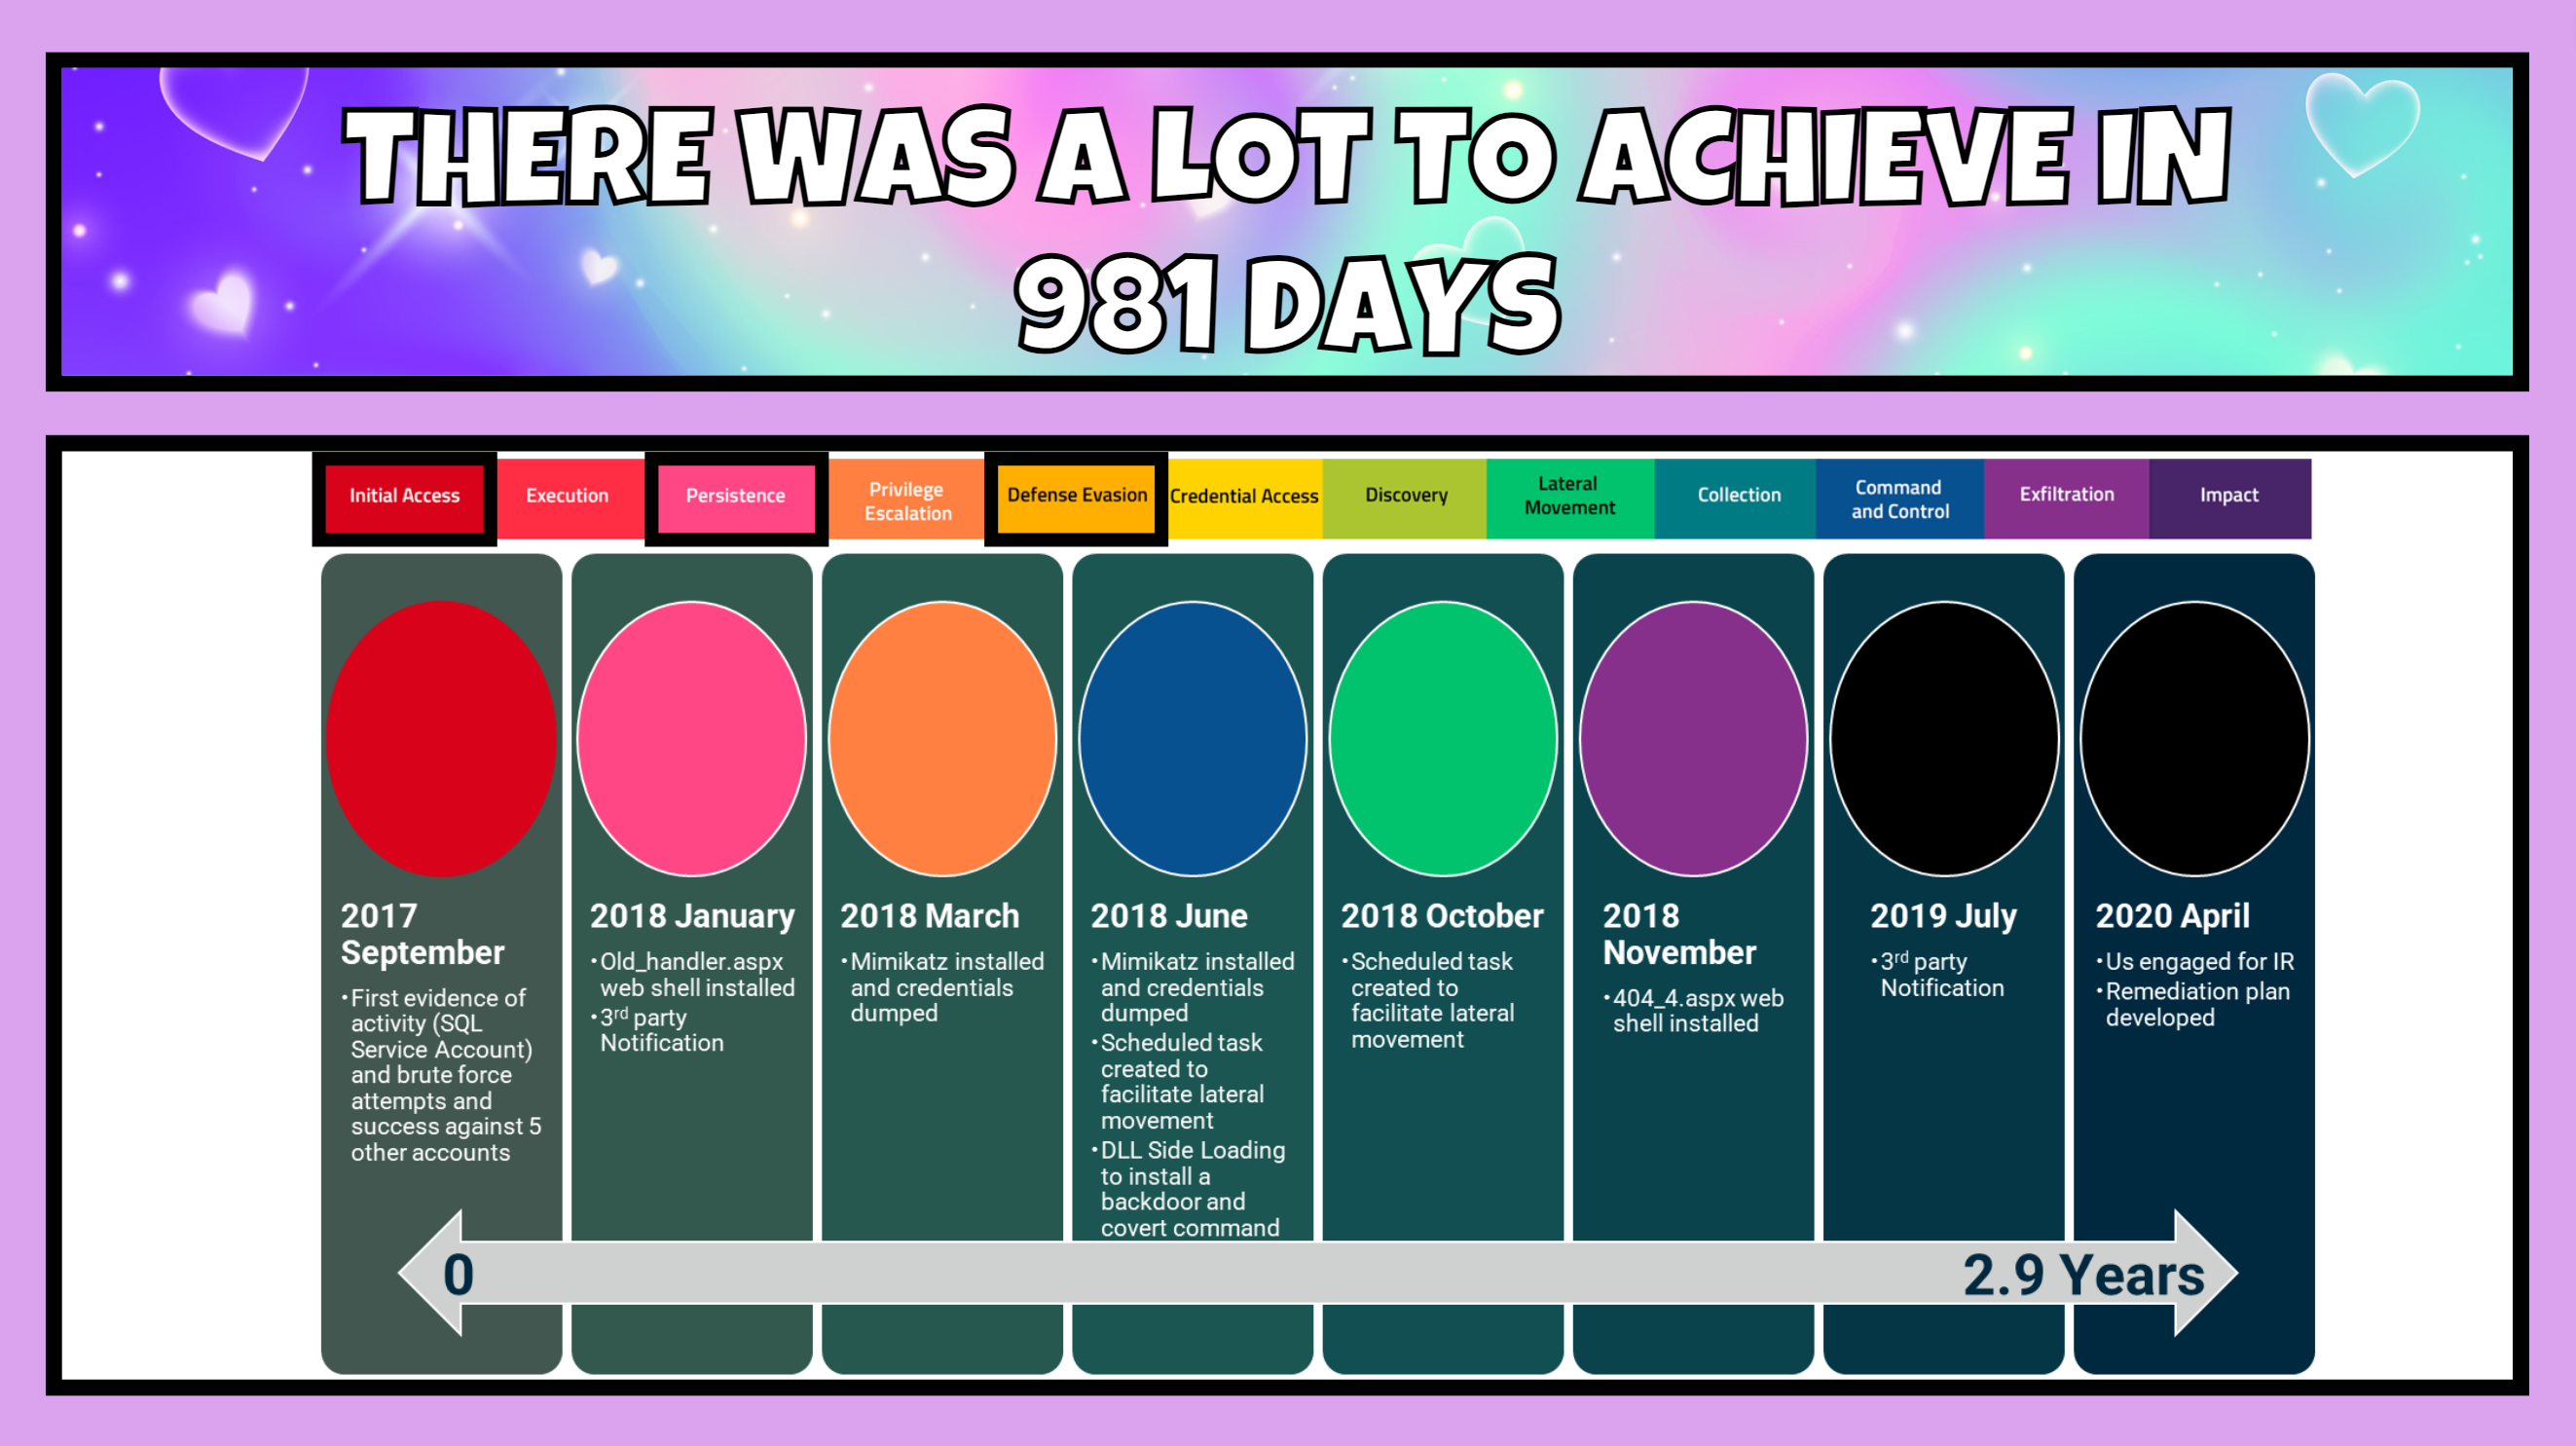 There was a lot to achieve in 981 days